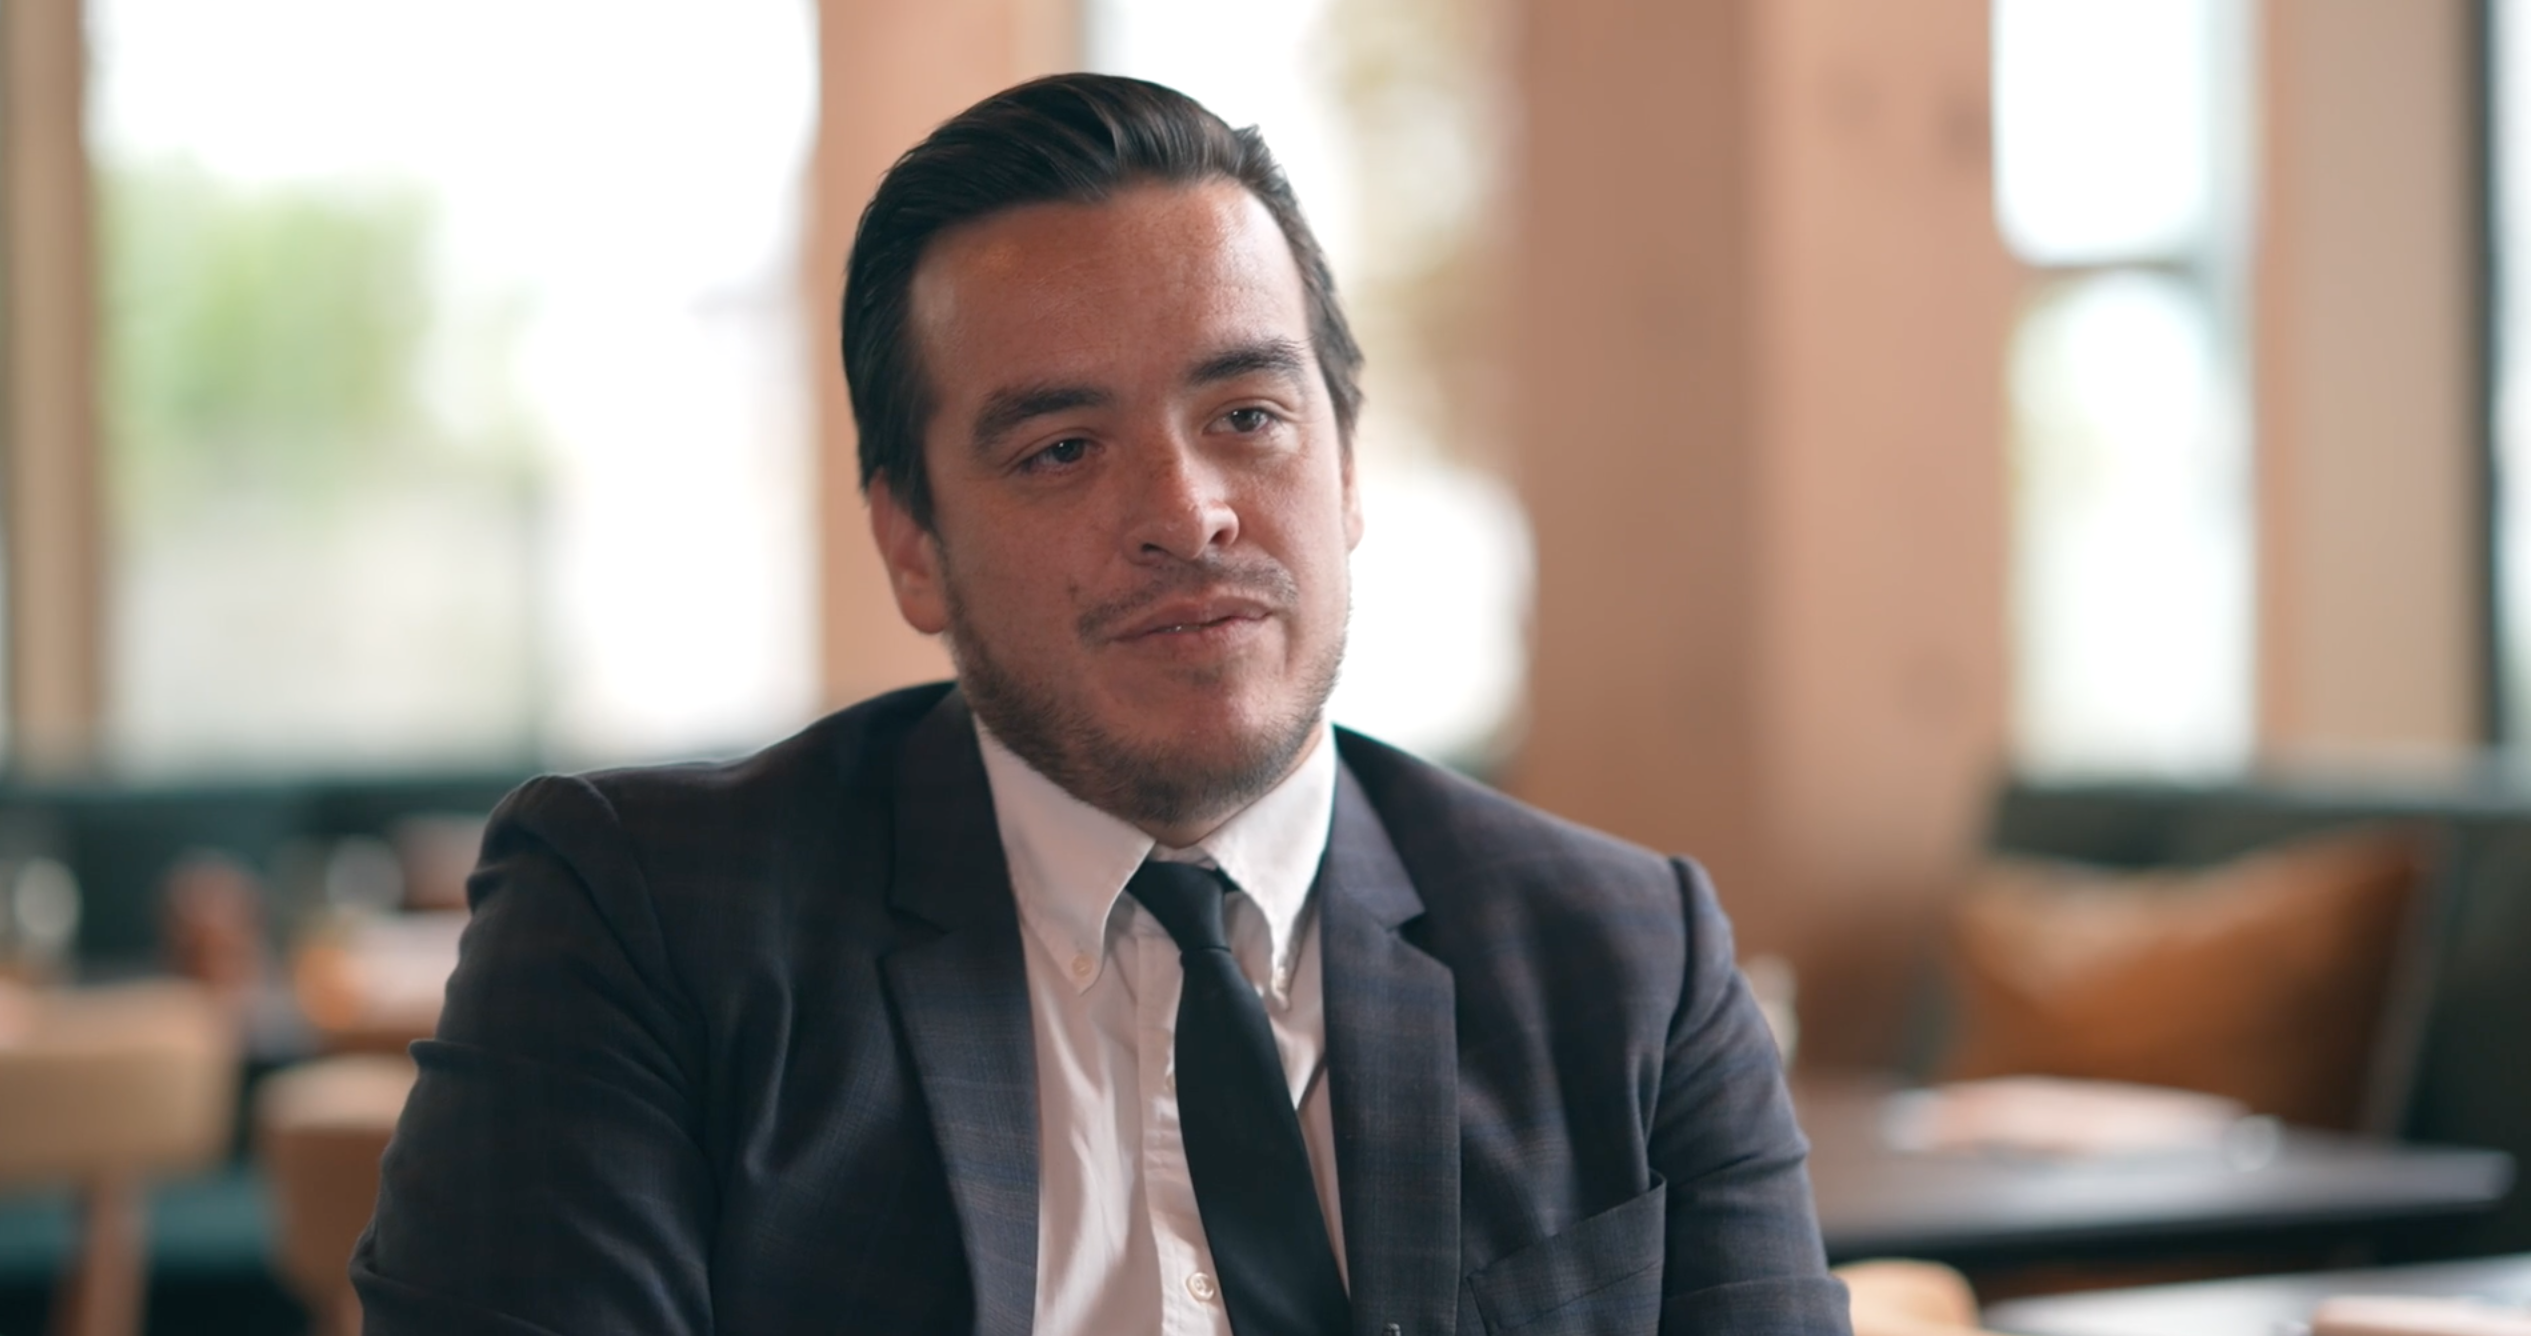 Interview with: Mario Ledermann, Technical Leader at Lendlease